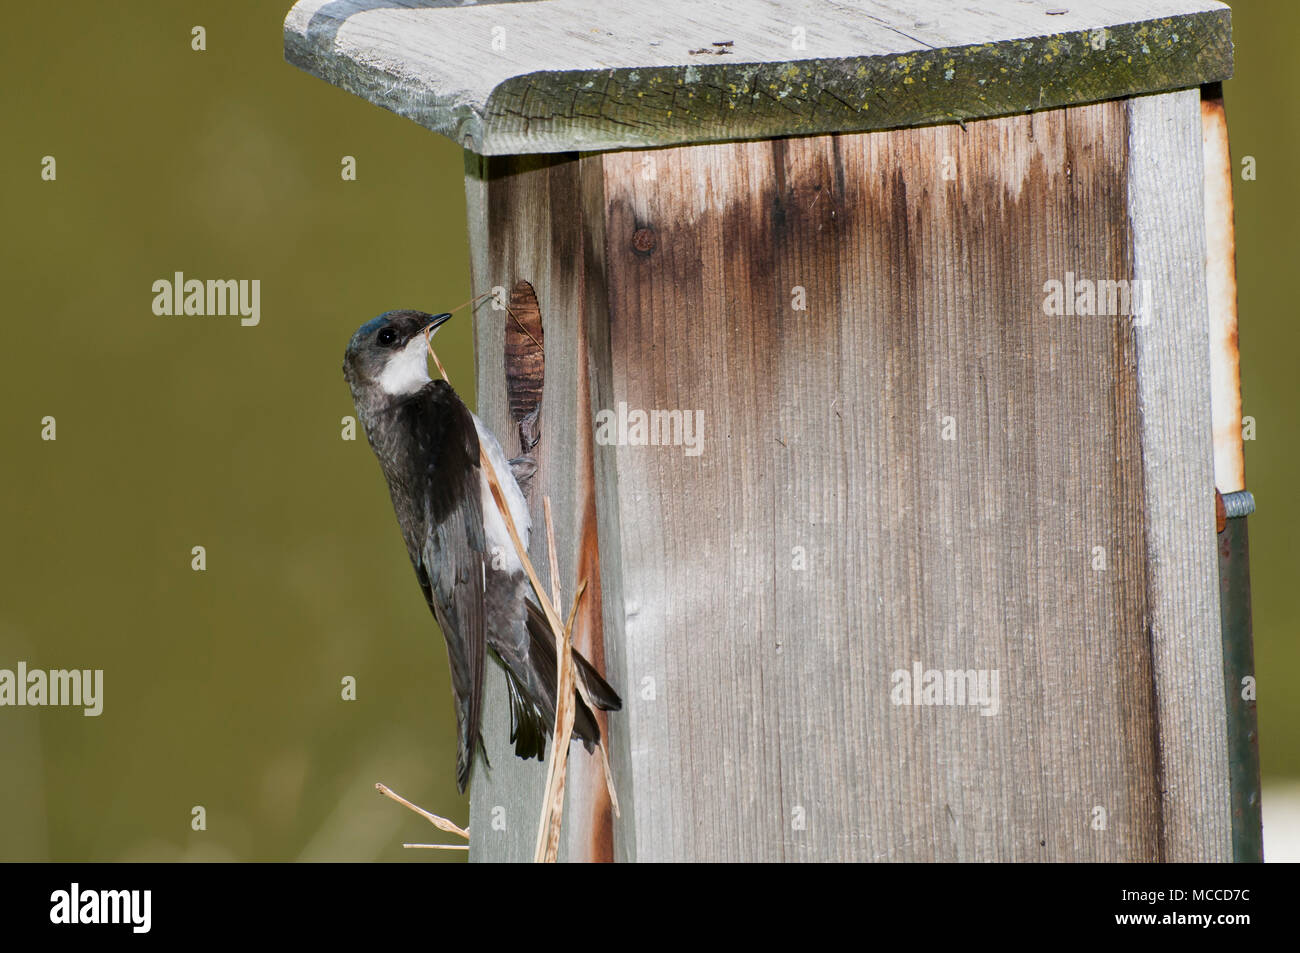 Little Canada, Minnesota. Gervais Park. Female Tree Swallow, Tachycineta bicolor, bringing nesting material to build a nest in the nesting box. Stock Photo